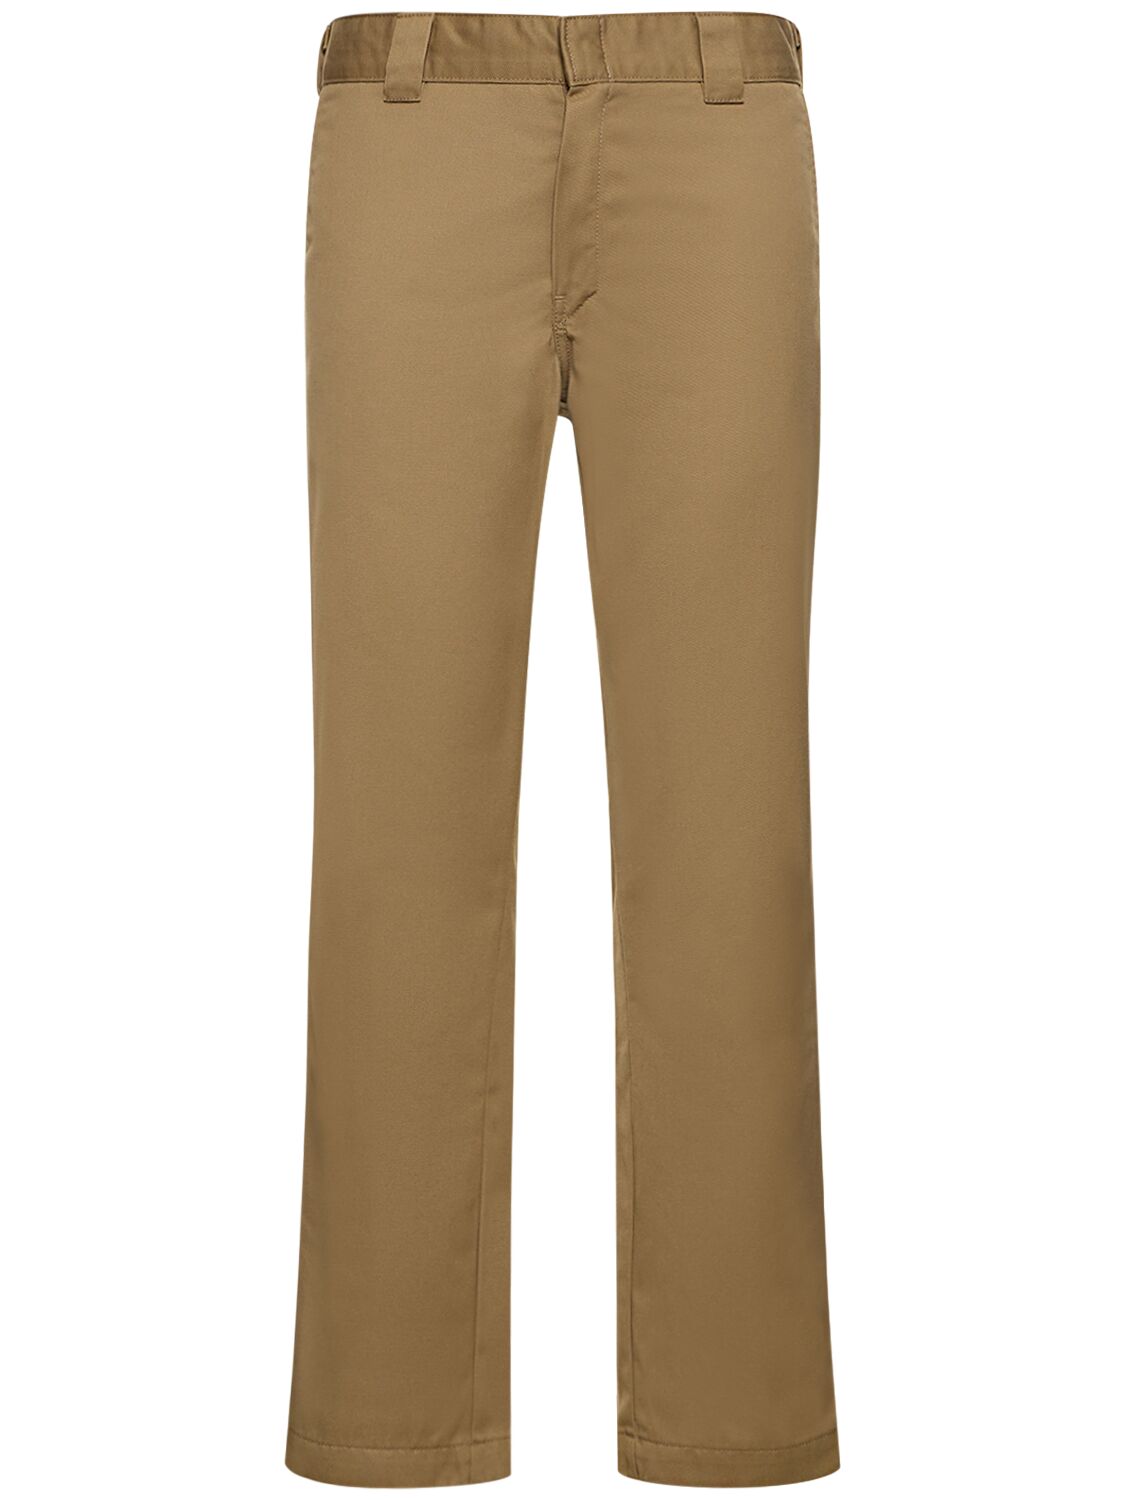 Carhartt Master Rinsed Cotton Blend Pants In Leather Rinsed